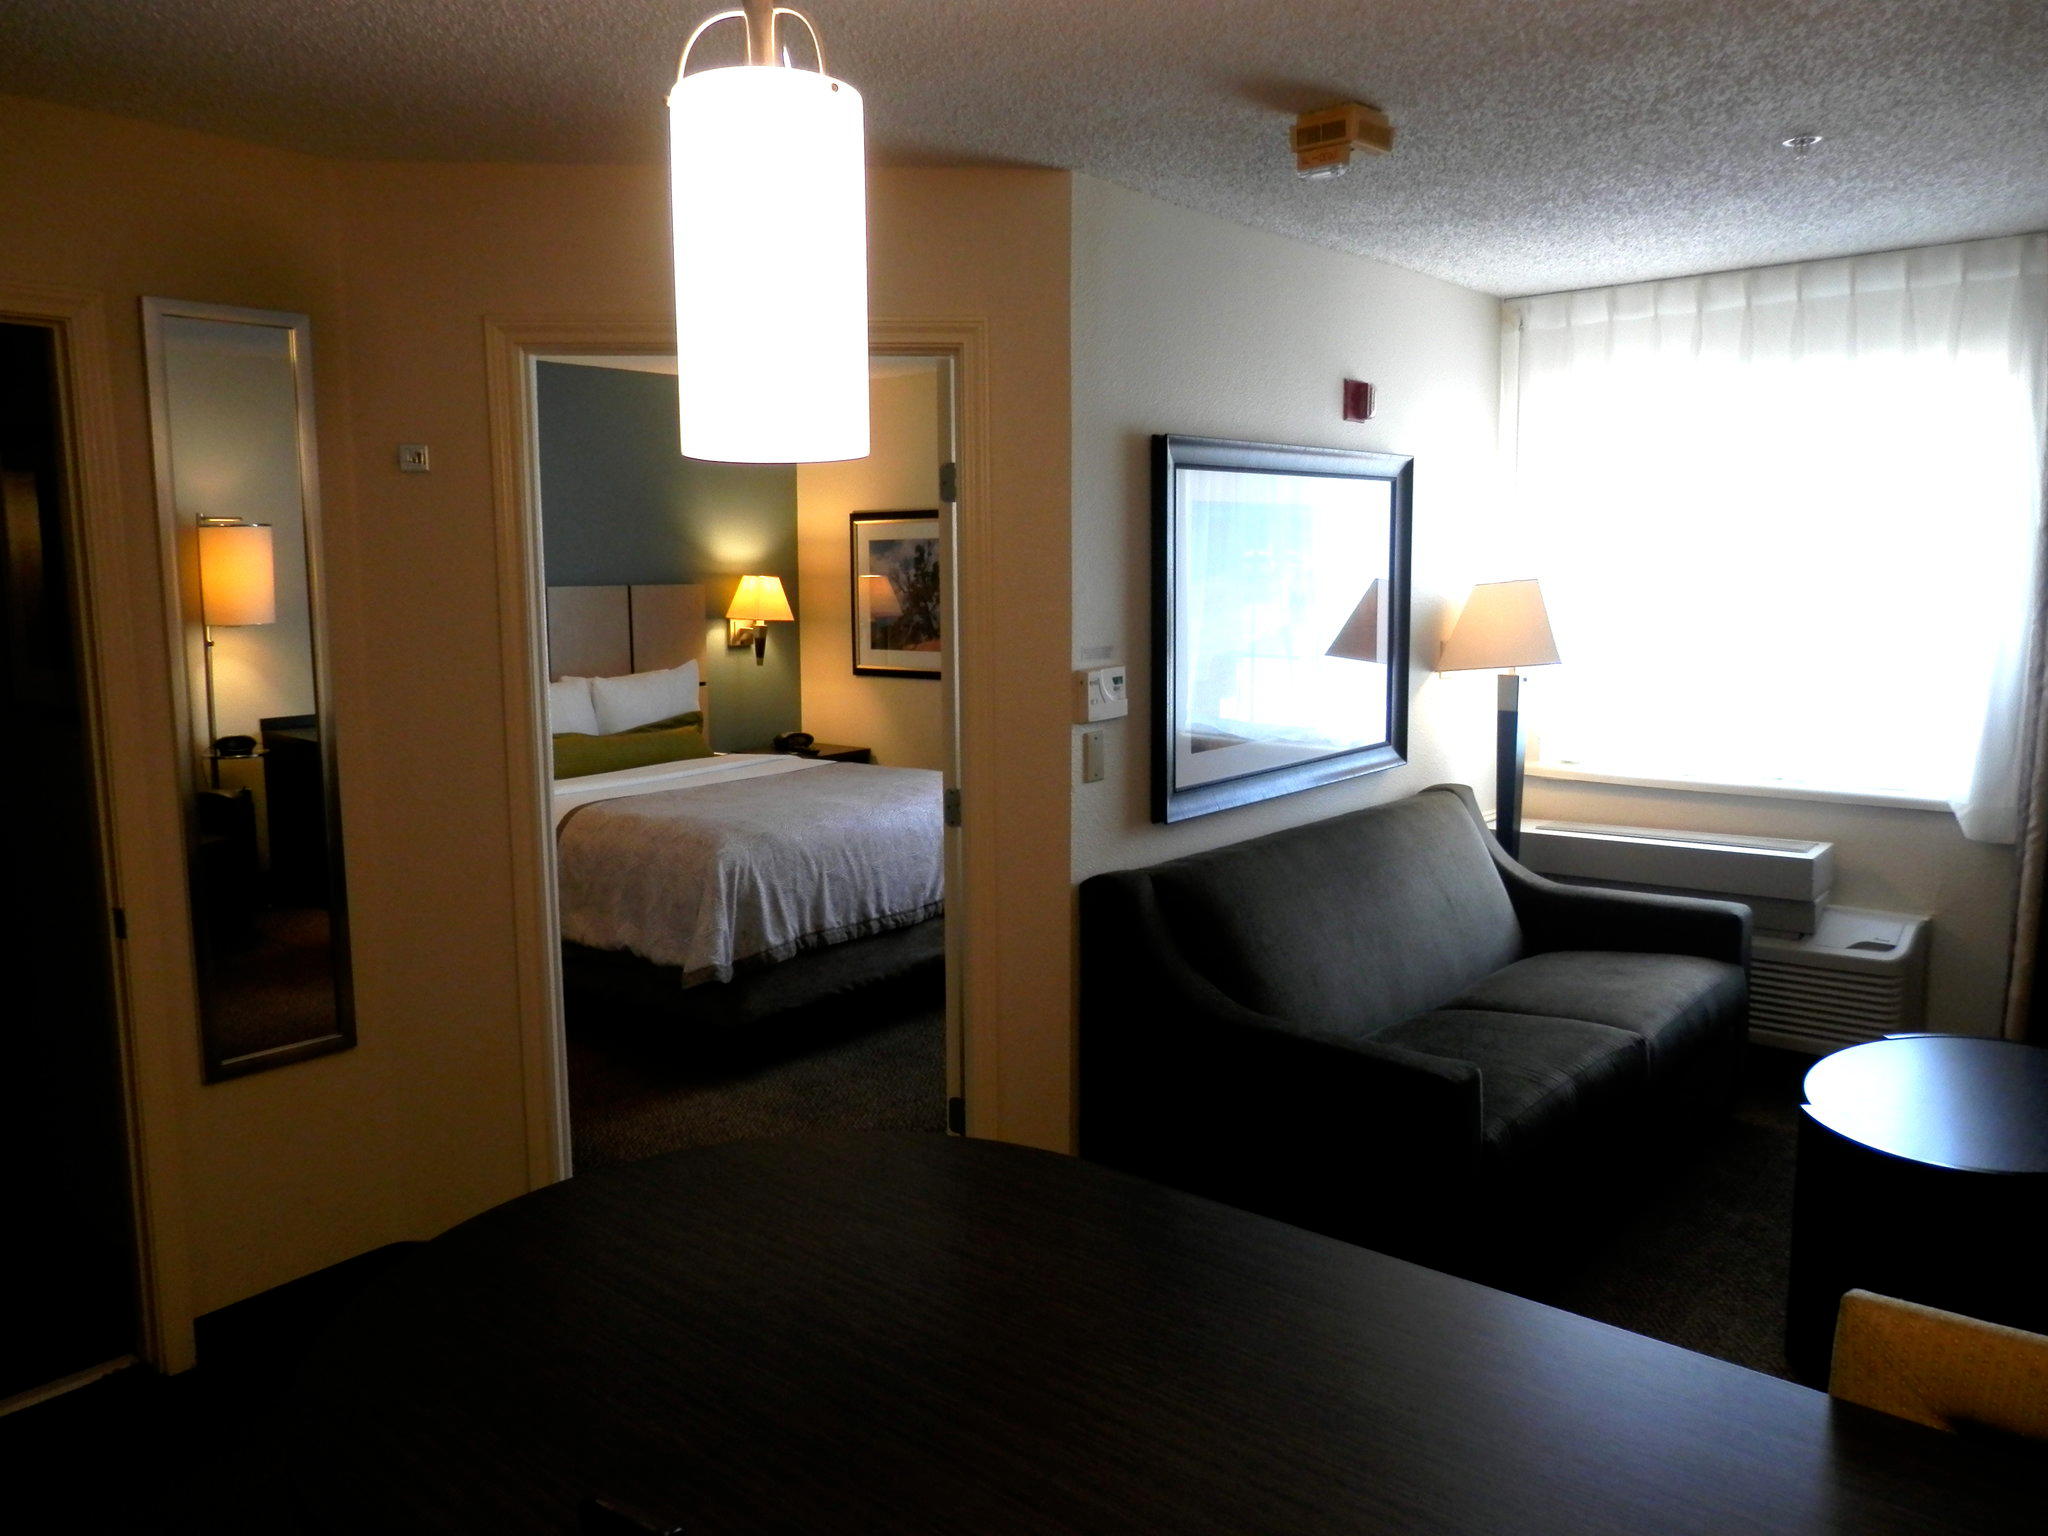 Candlewood Suites Houston-Clear Lake Photo